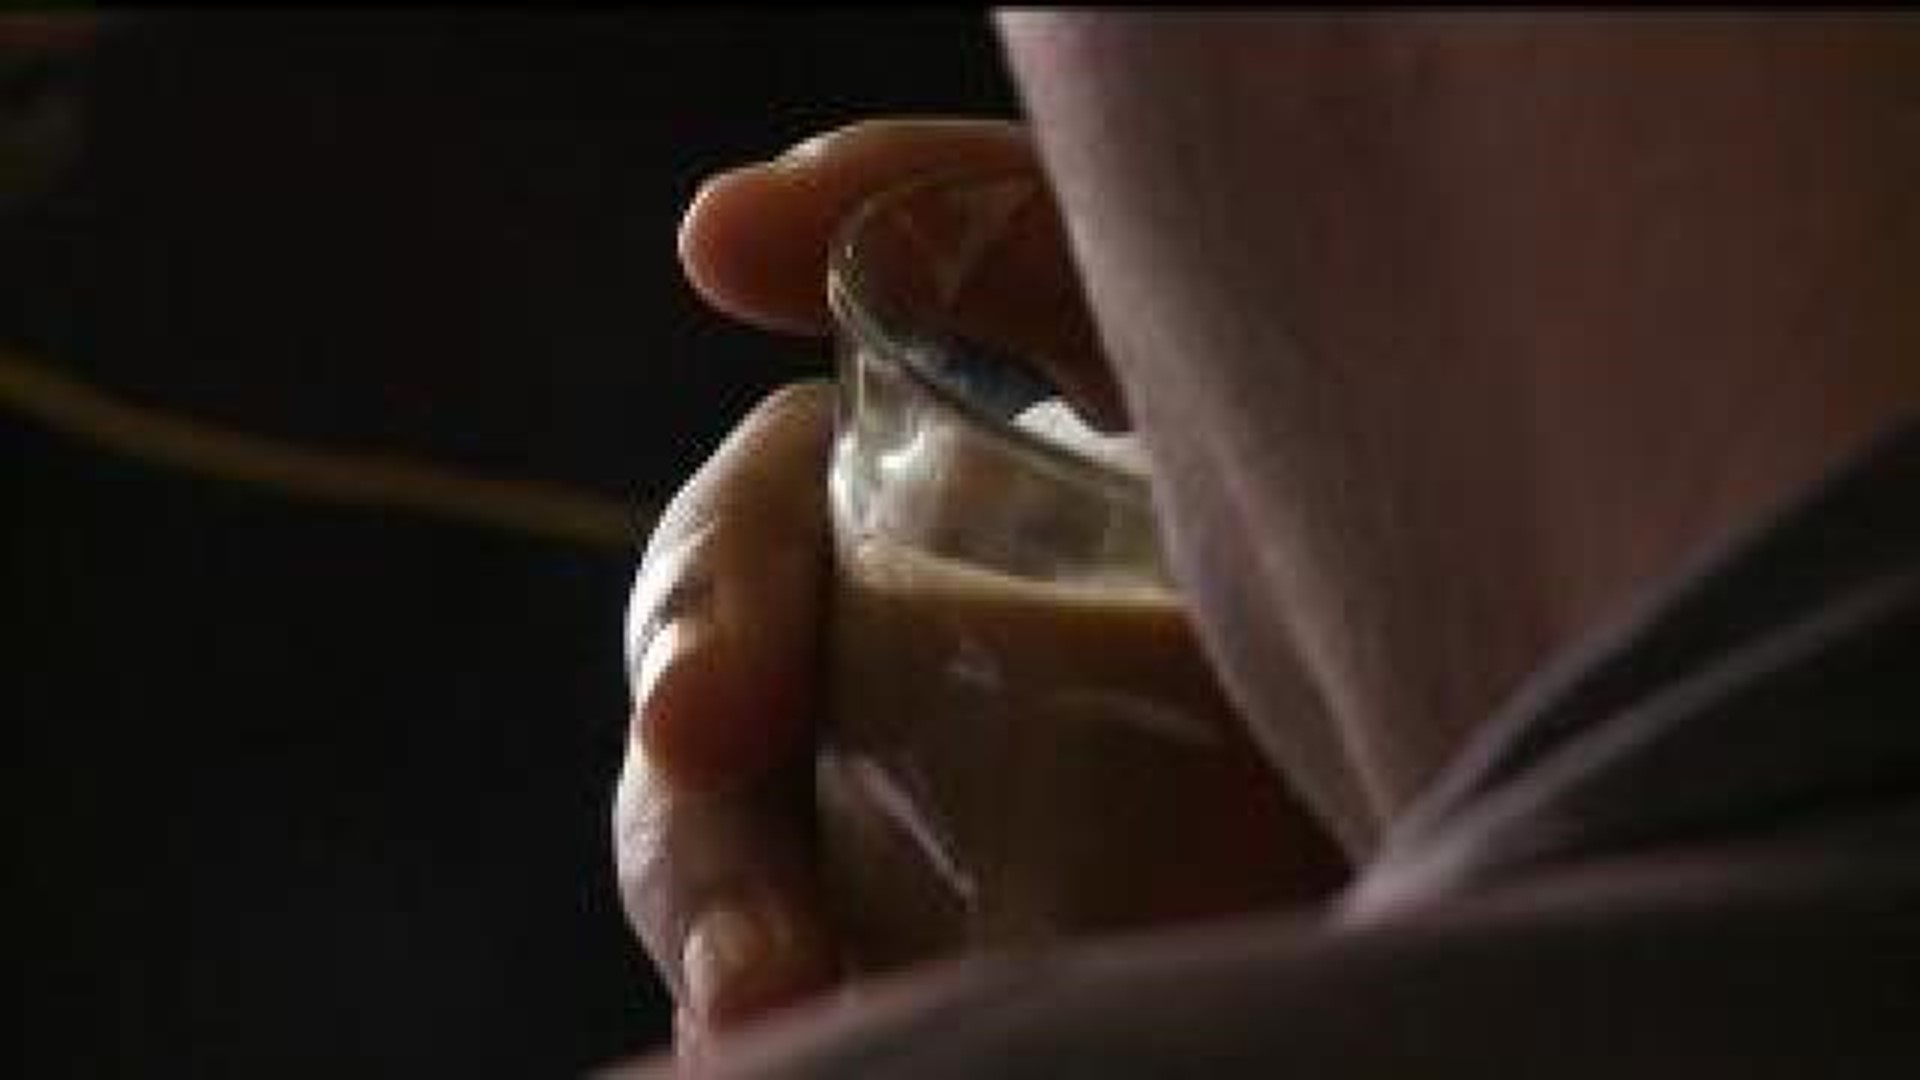 Coffee study links amount consumed to death risk